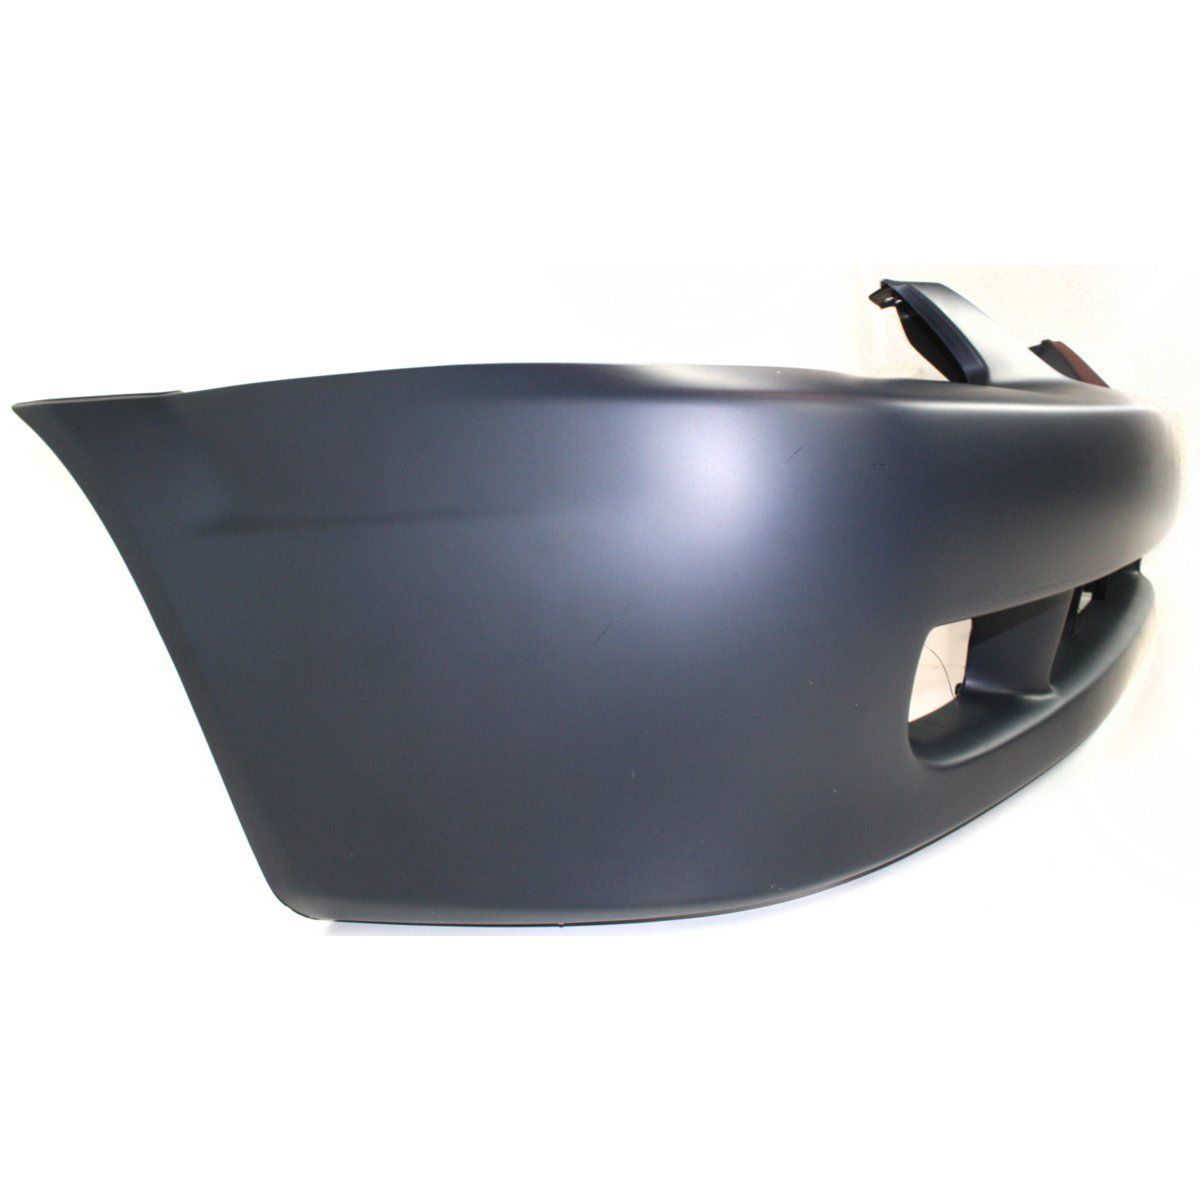 1999-2000 MAZDA 323/PROTEGE Front Bumper Cover Painted to Match